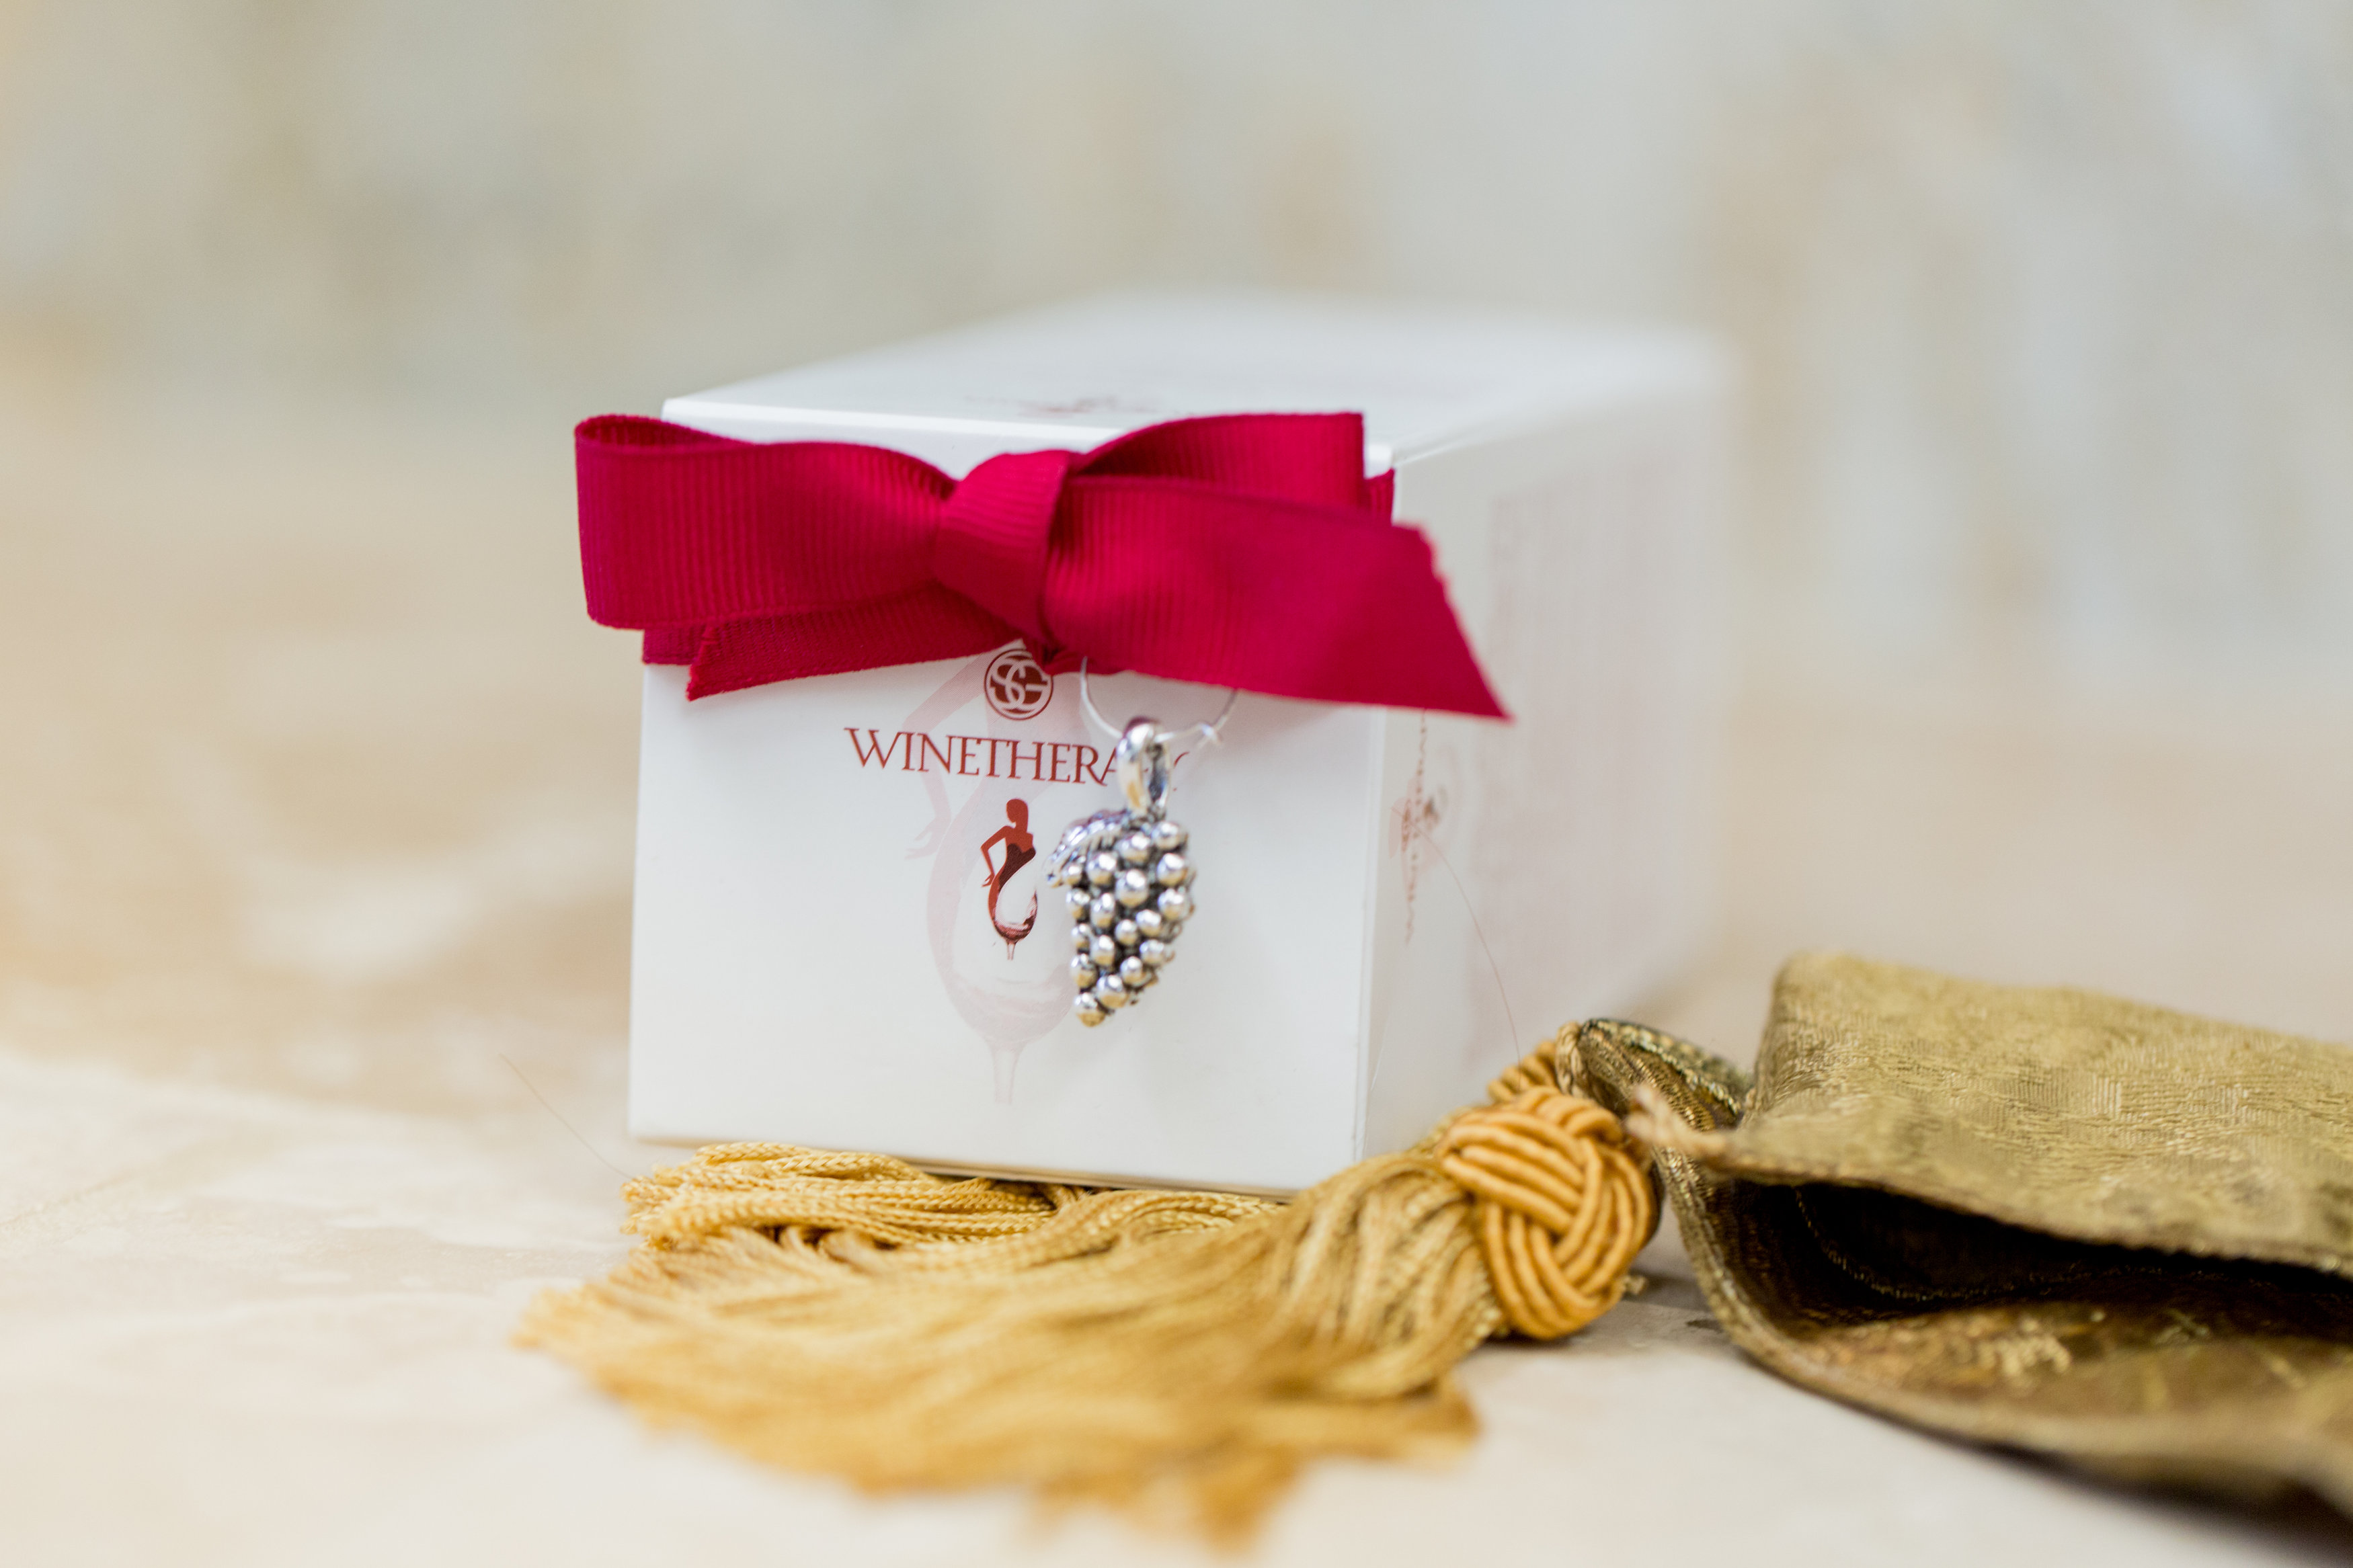 Winetherapy products are packaged with a wine glass charm